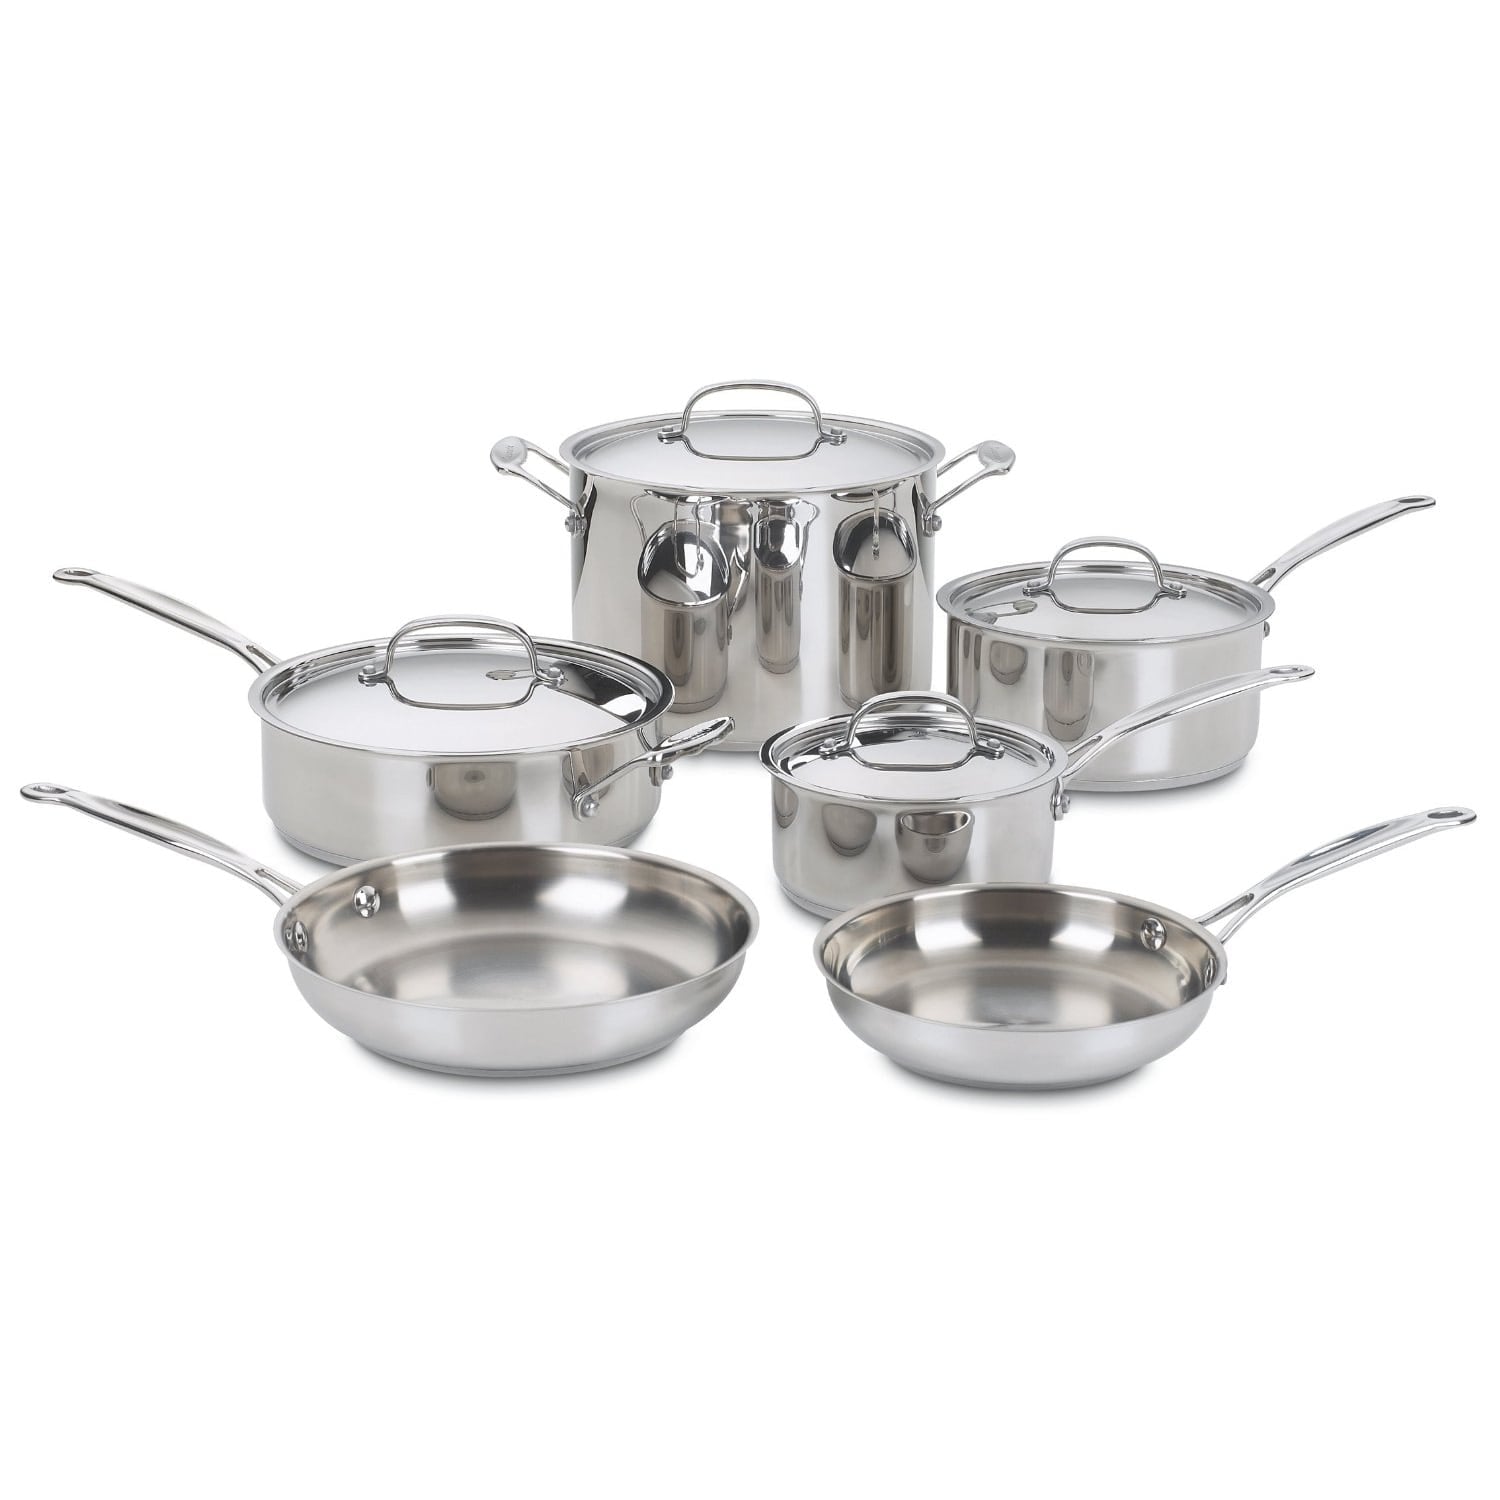 https://ak1.ostkcdn.com/images/products/is/images/direct/8df1e414e7e74e6dc2e4973a484a0c2ae40f3857/Cuisinart-77-10-Chef%27s-Classic-Stainless-10-Piece-Cookware-Set.jpg